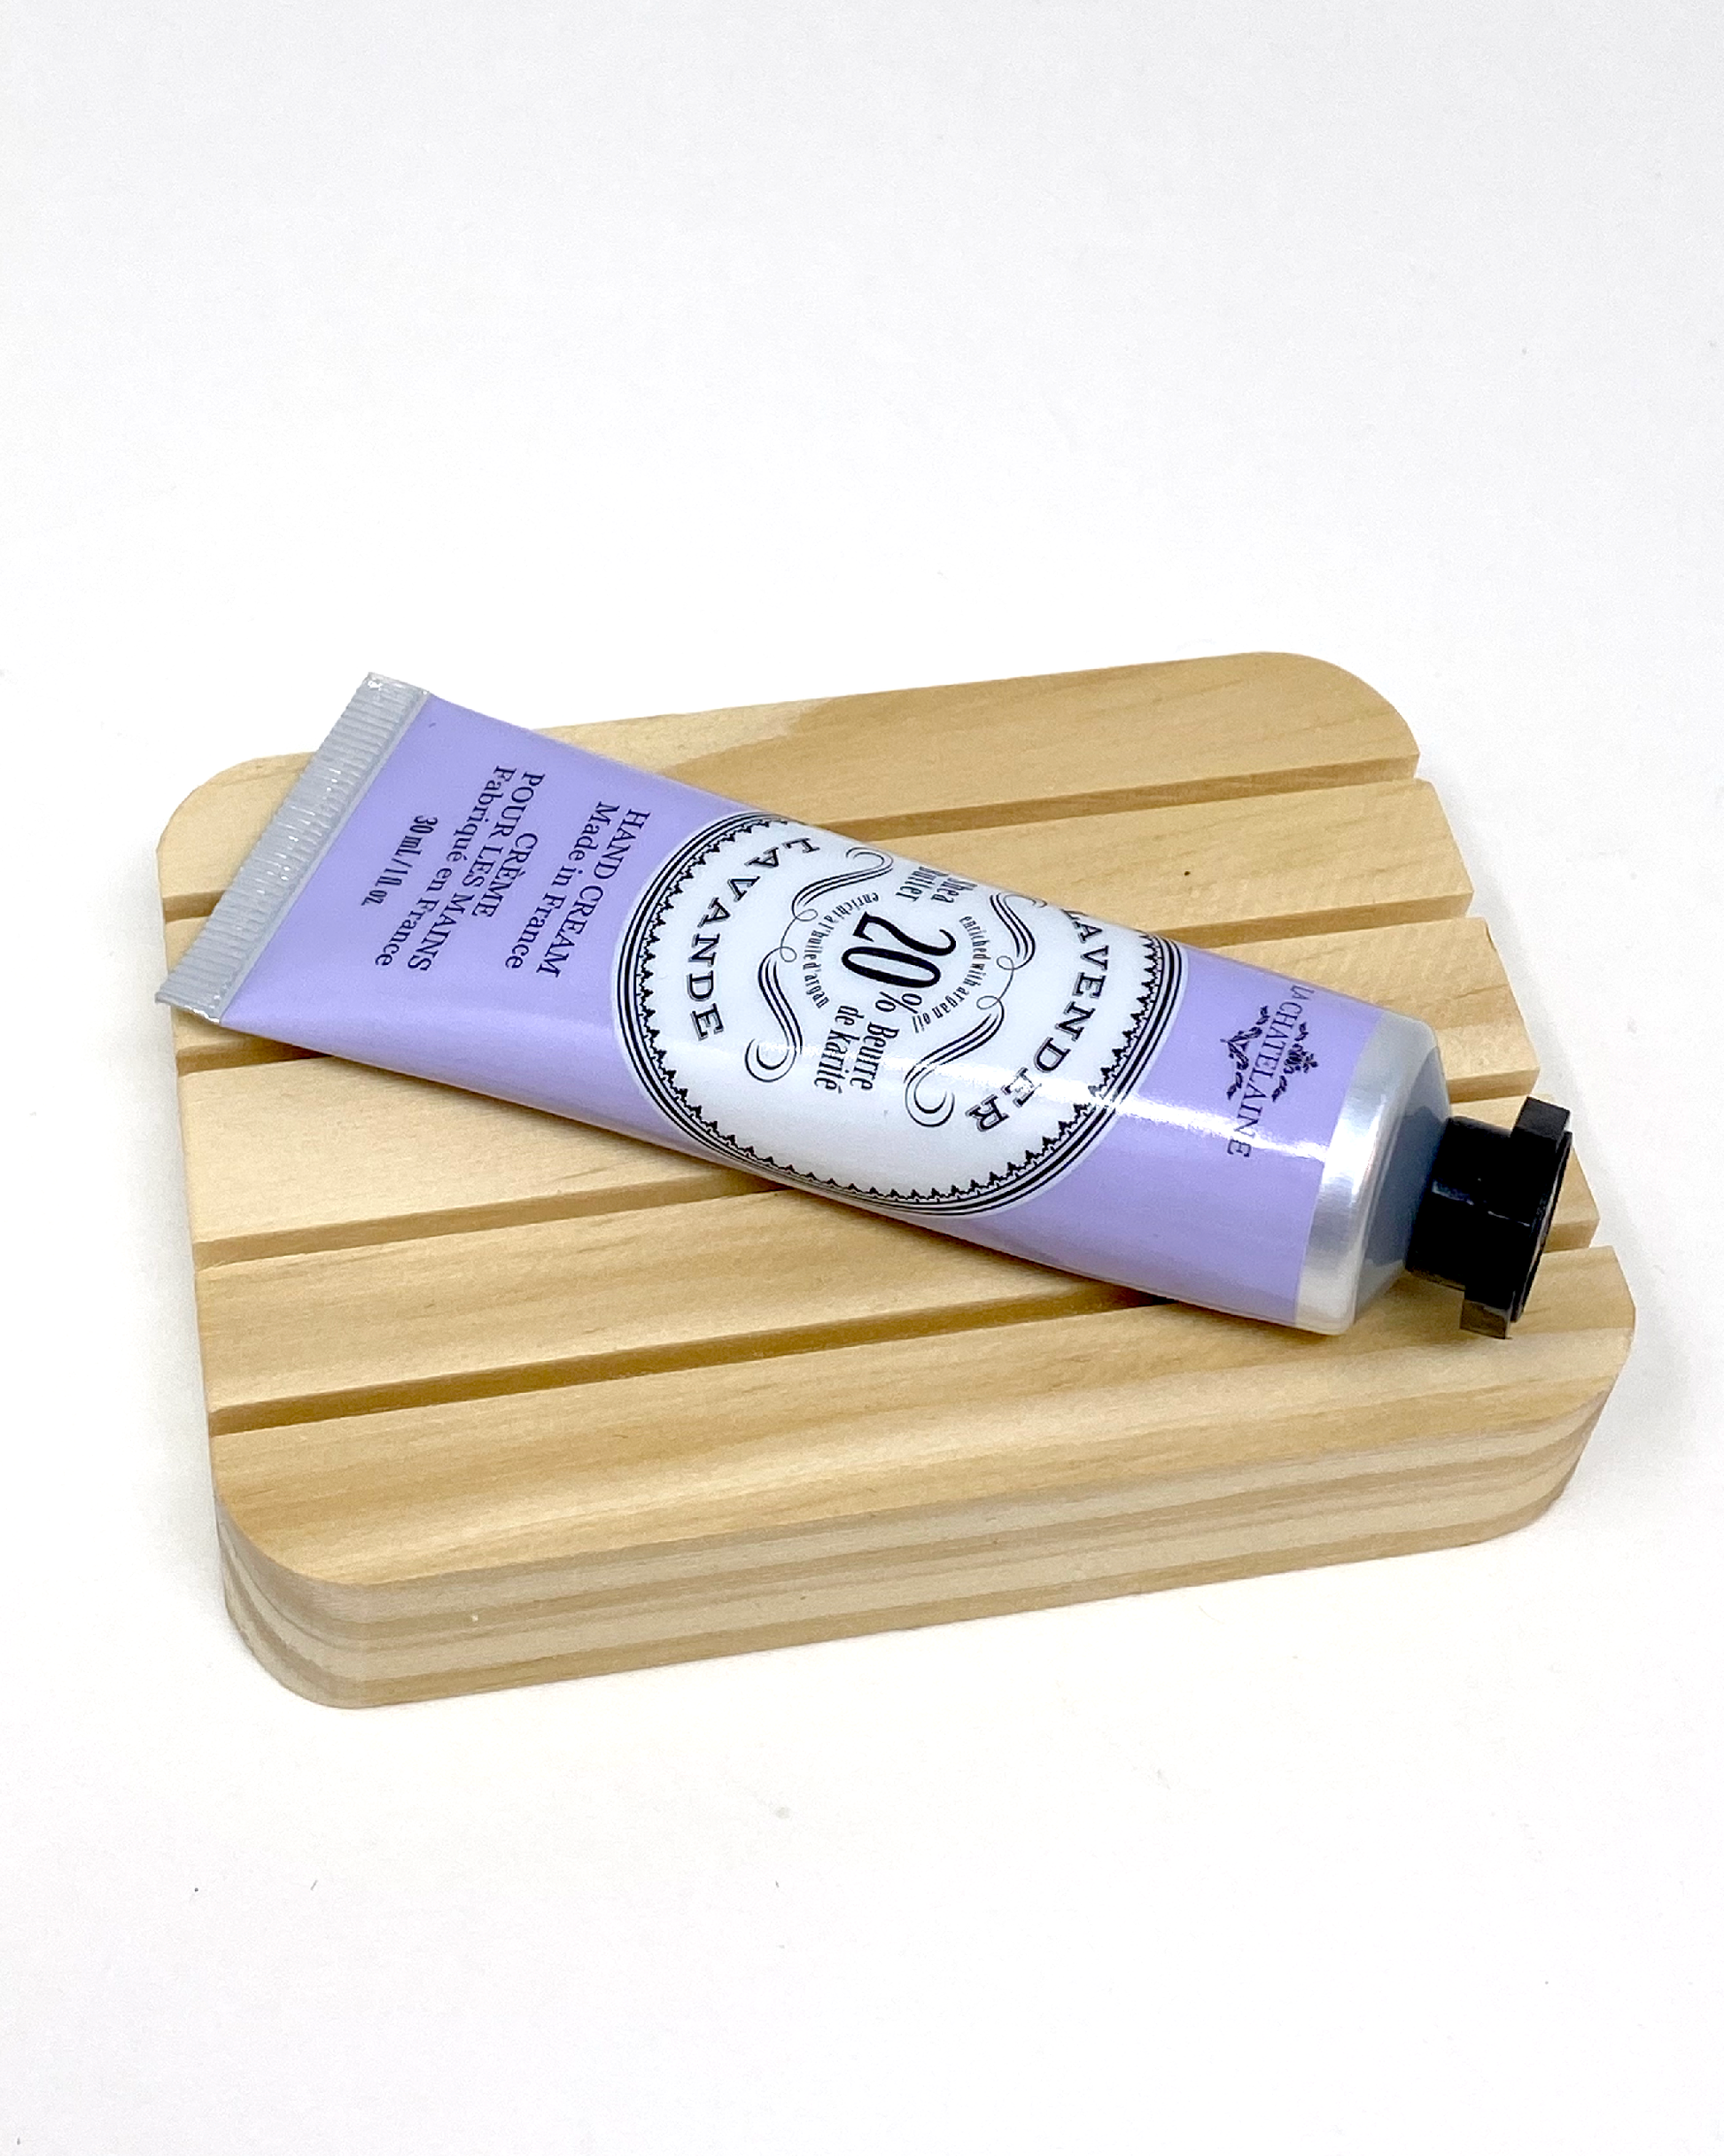 Lavendar Hand lotion. Luxury hand lotion made with shea butter and argan oil. La Chatelaine hand lotion made in France